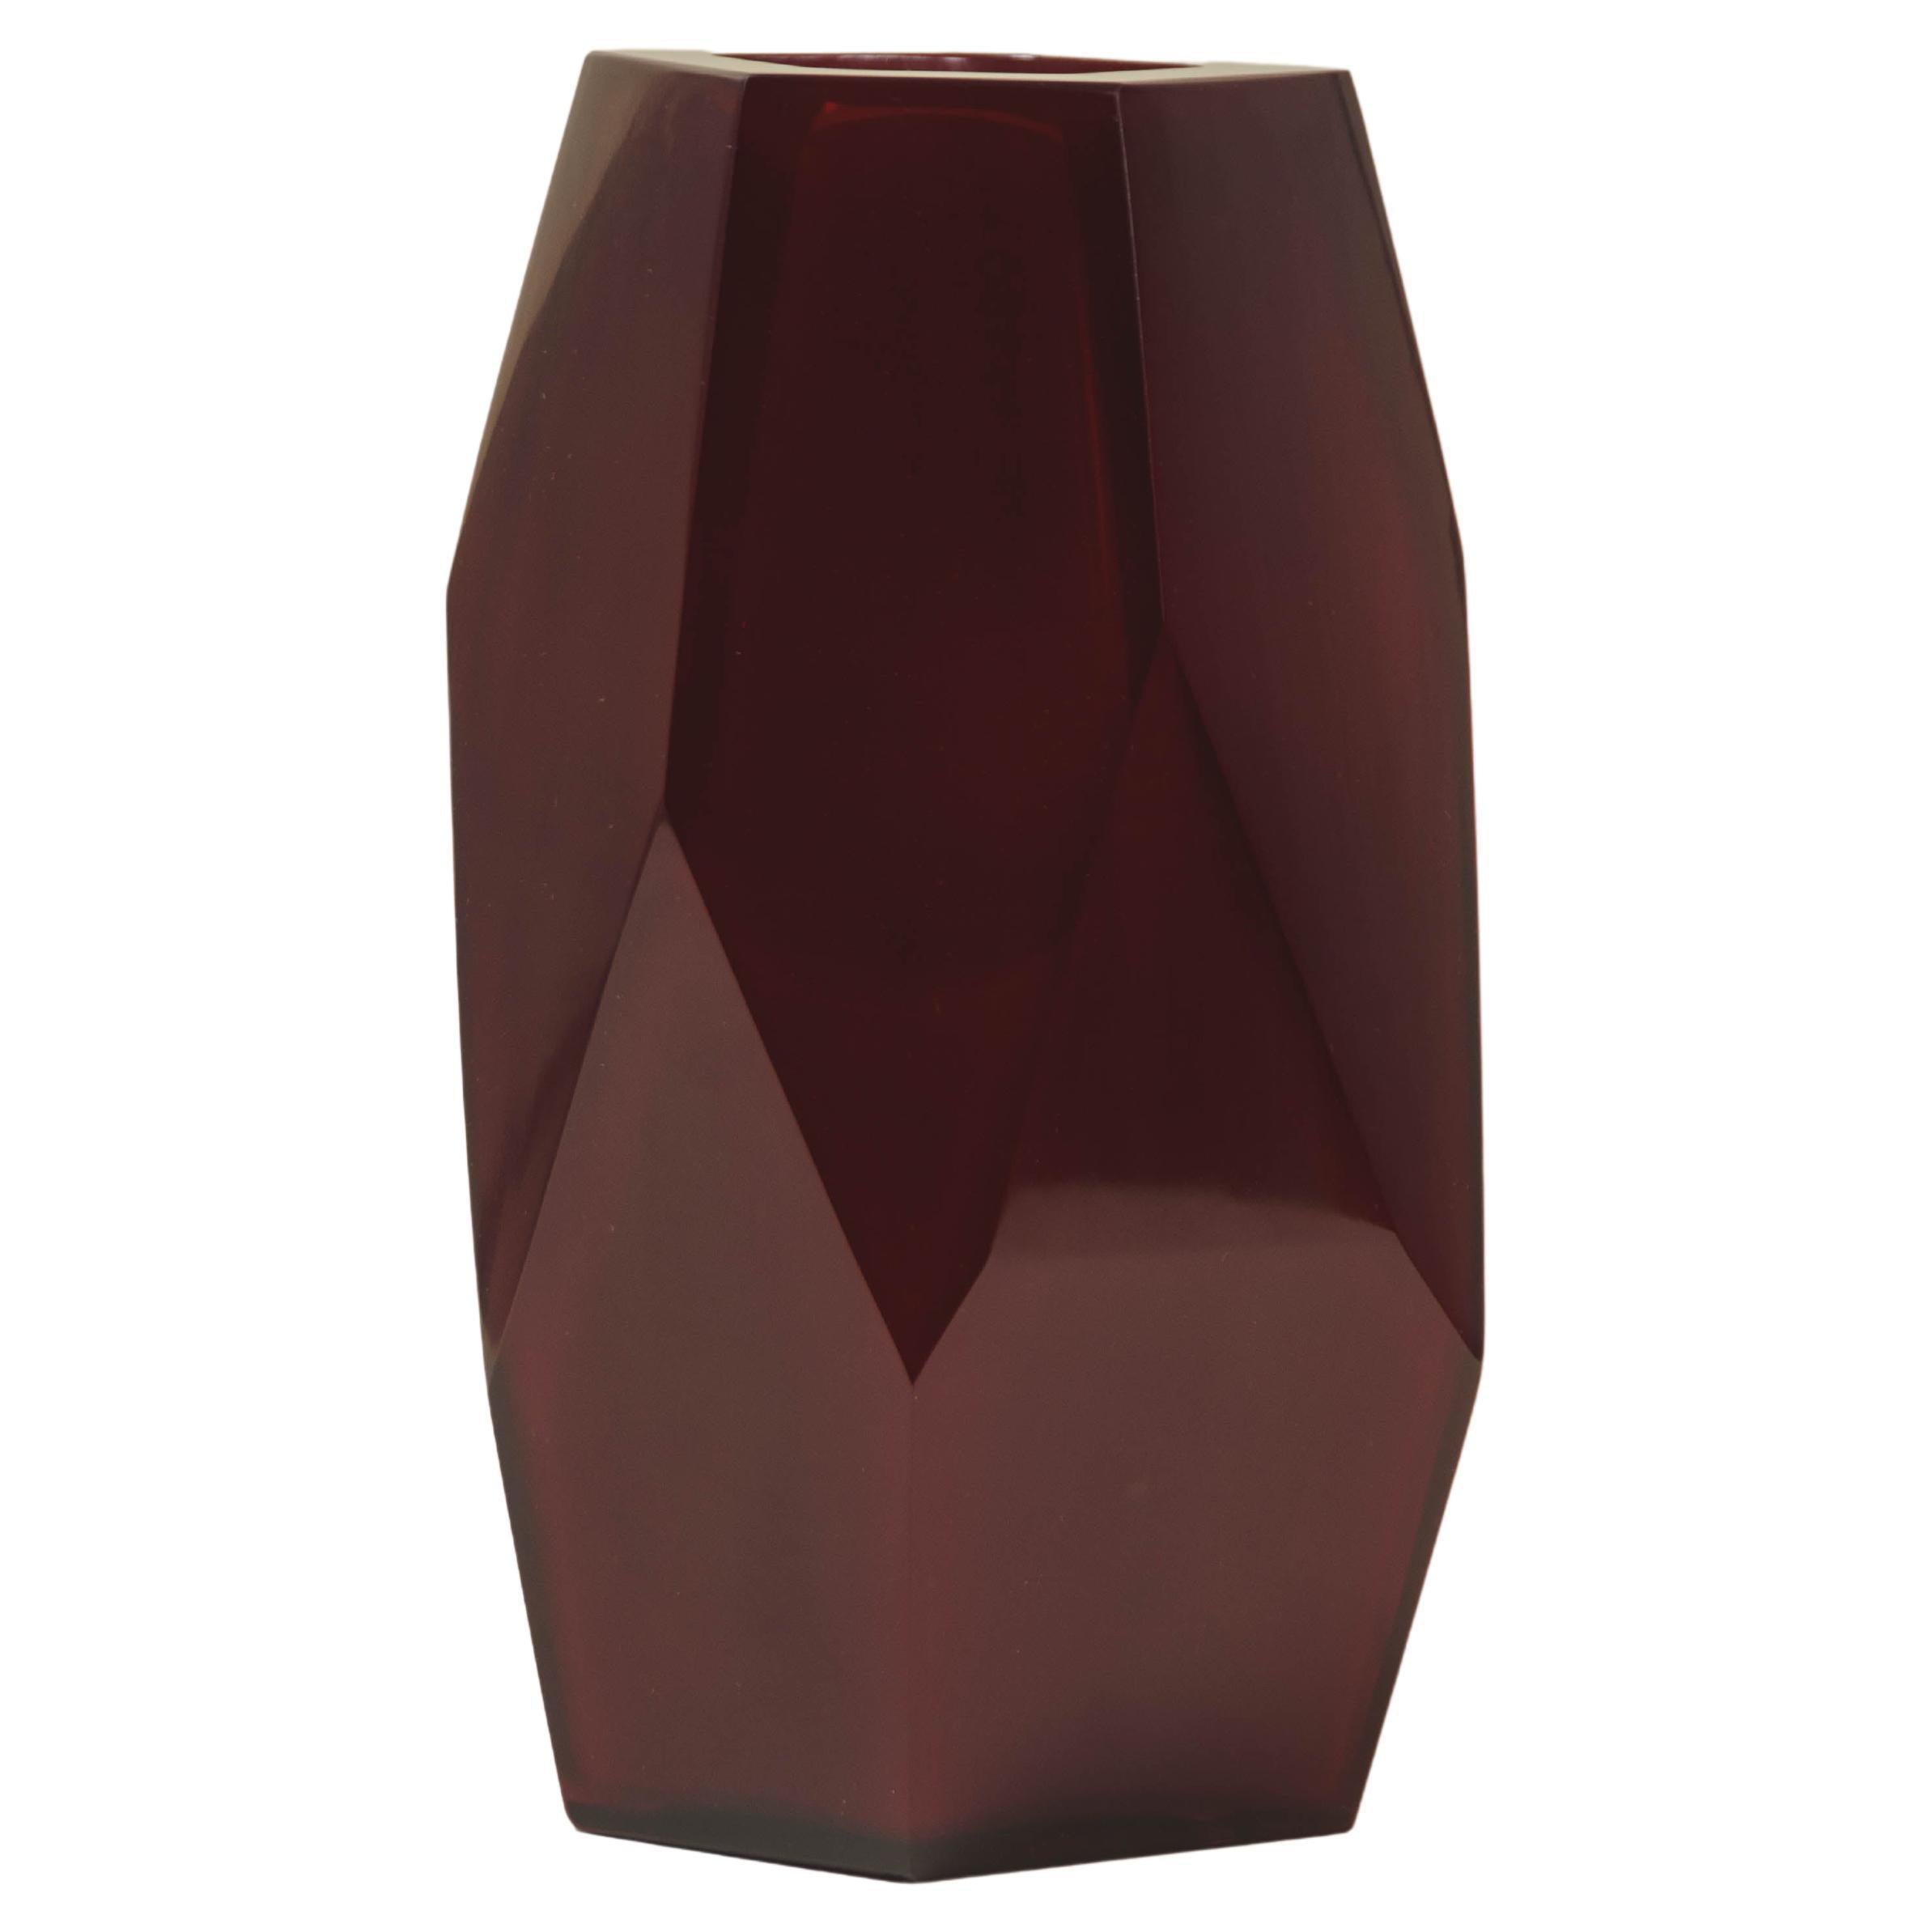 Contemporary Grand Facet Vase in Raspberry Peking Glass by Robert Kuo